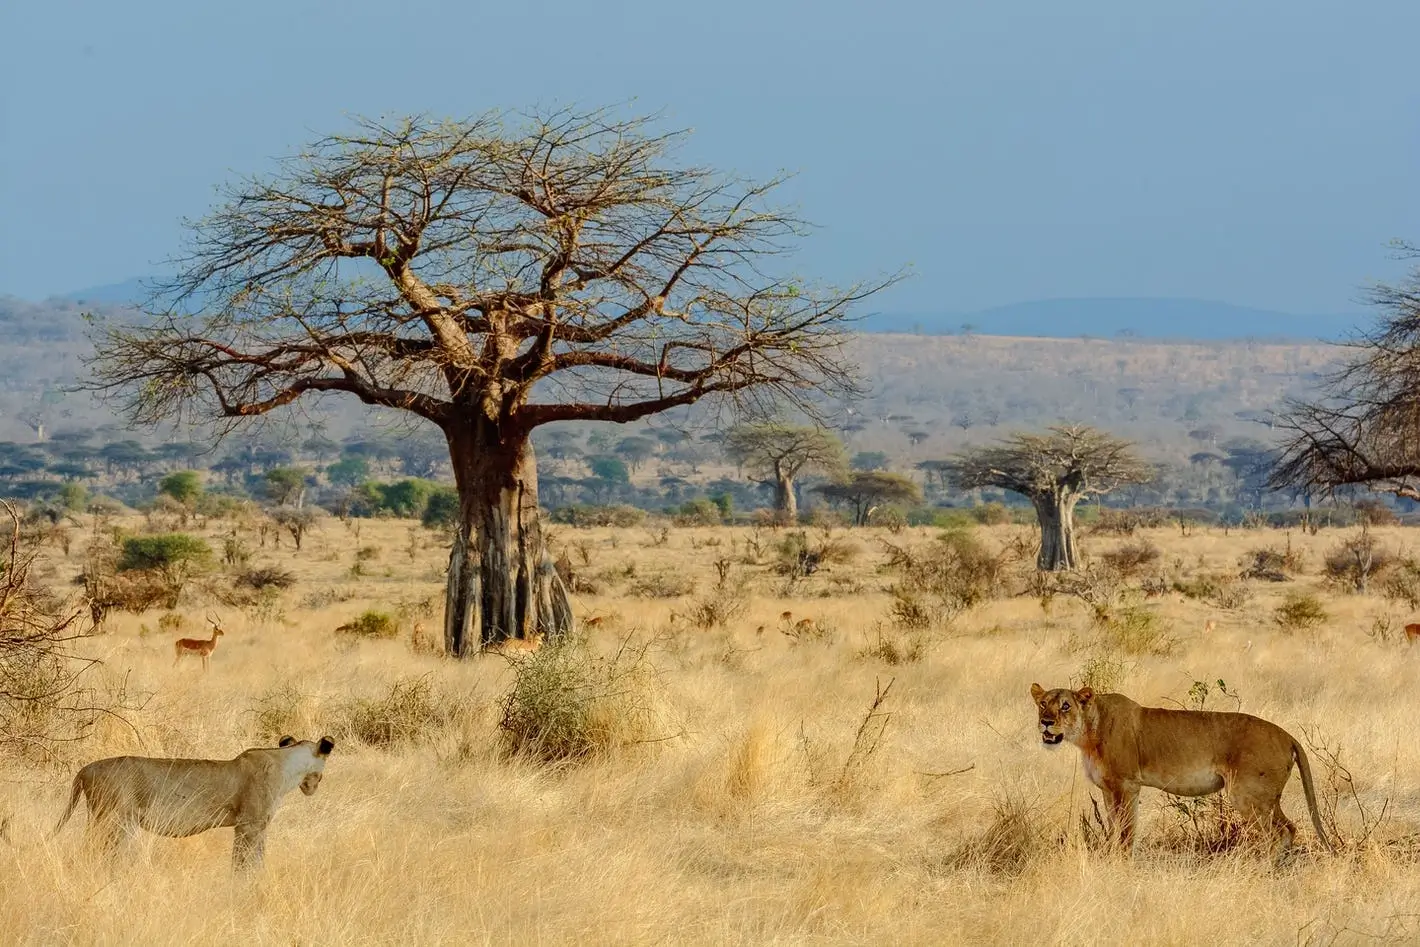 Lions and dears in one frame in O Ruaha National Park